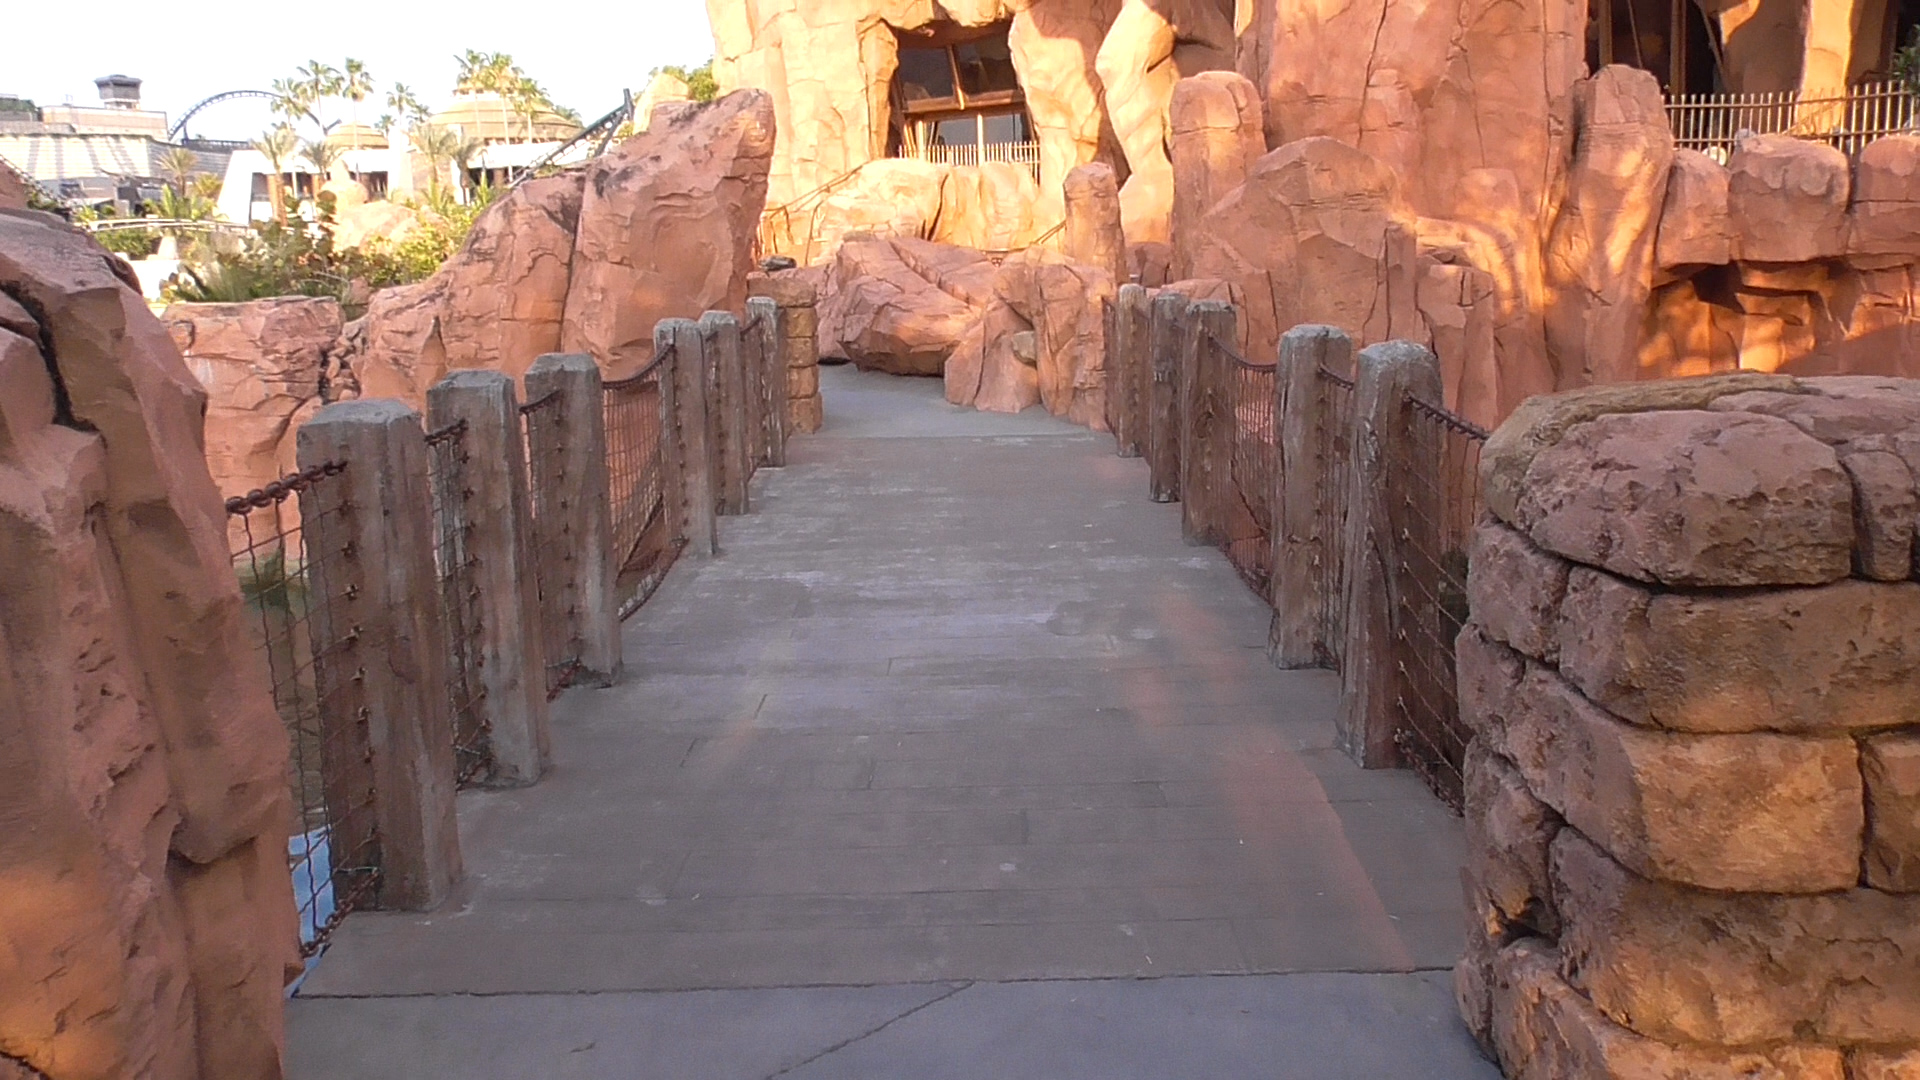 Possible location at Islands of Adventure for LOTR attraction - MiceChat